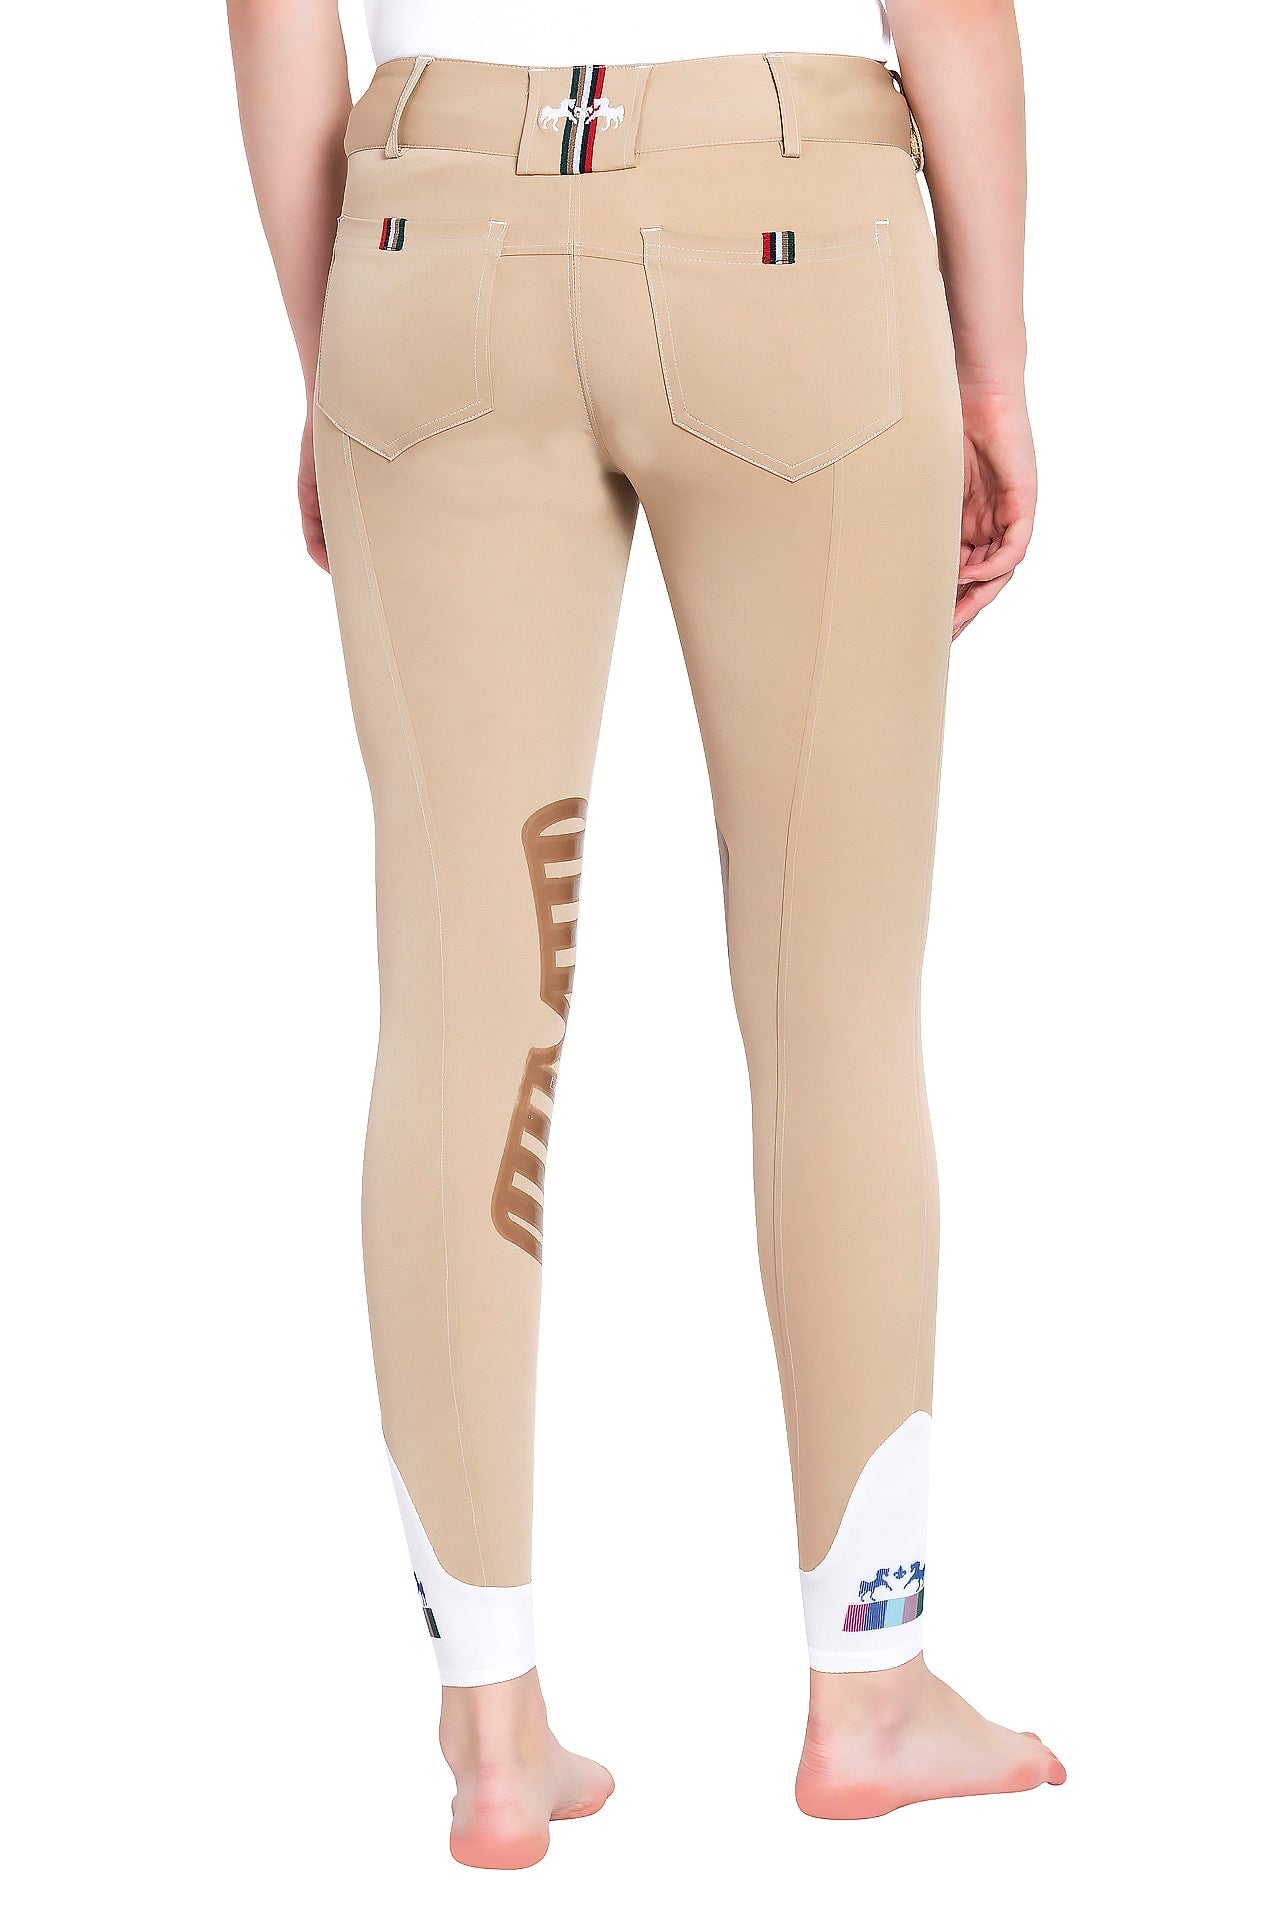 Equine Couture Ladies Brinley Silicone Knee Patch Breeches - Breeches.com